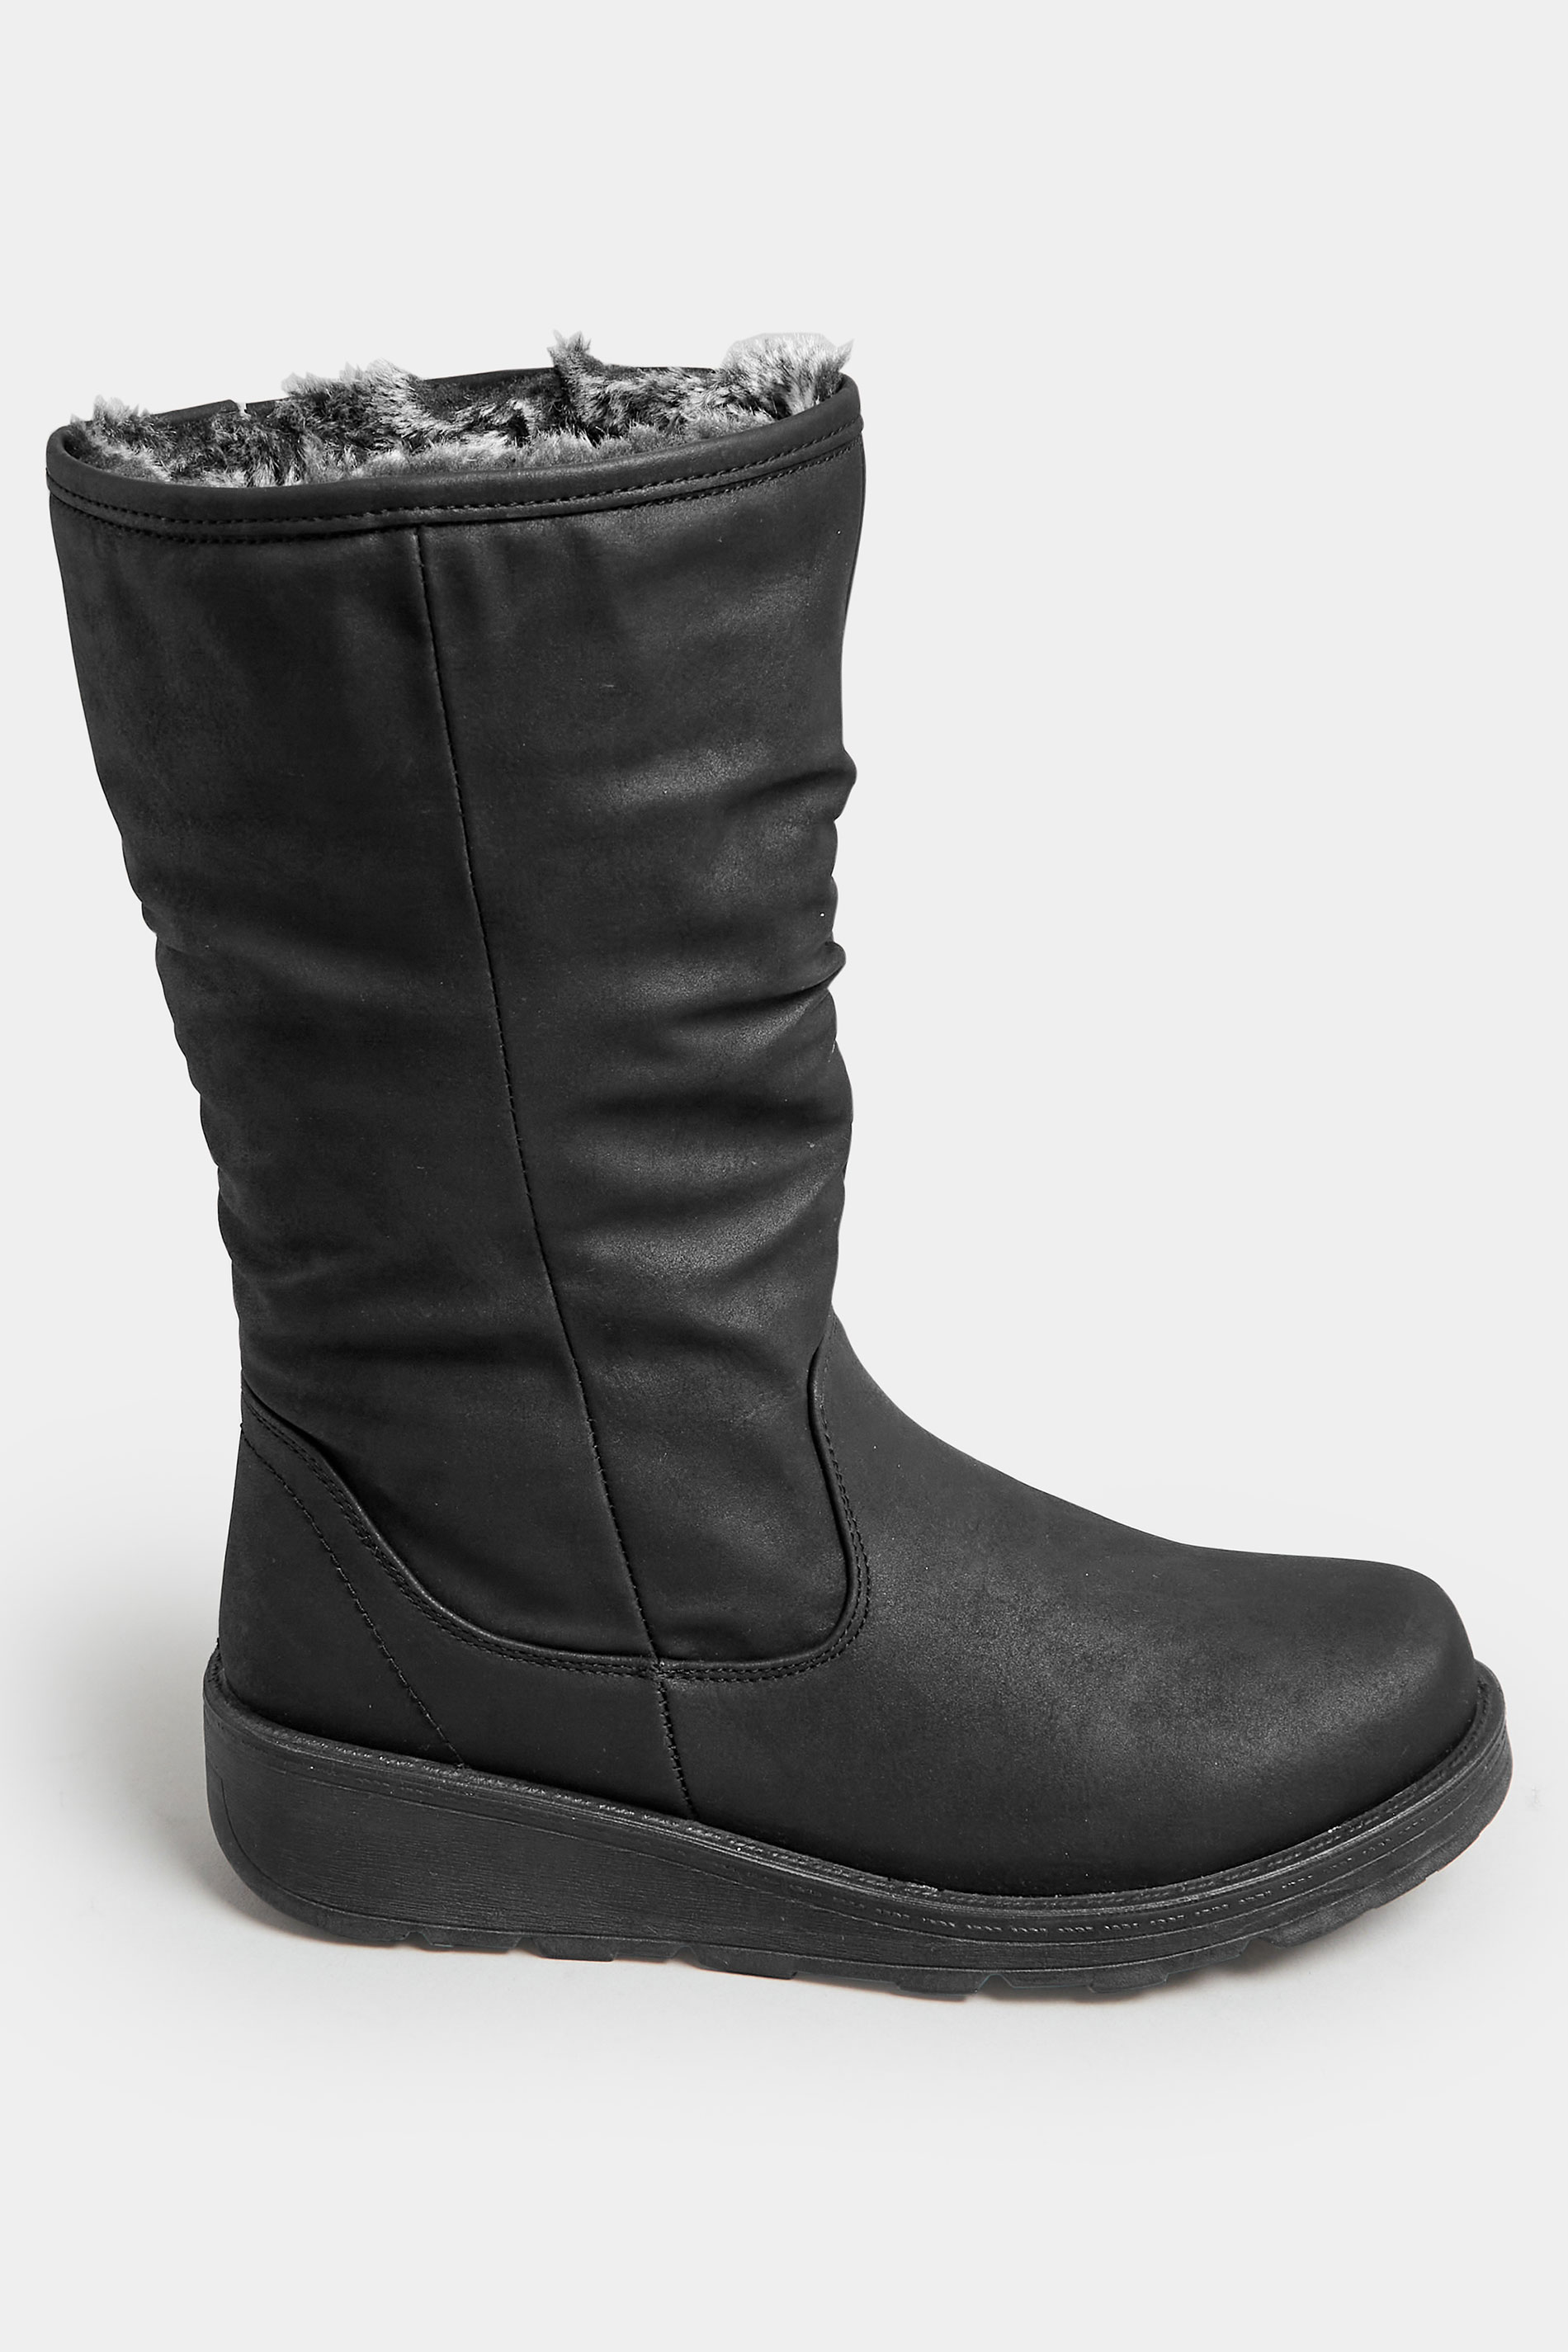 Black Fur Lined Calf Boots In Wide E Fit & Wide EEE Fit | Yours Clothing 3